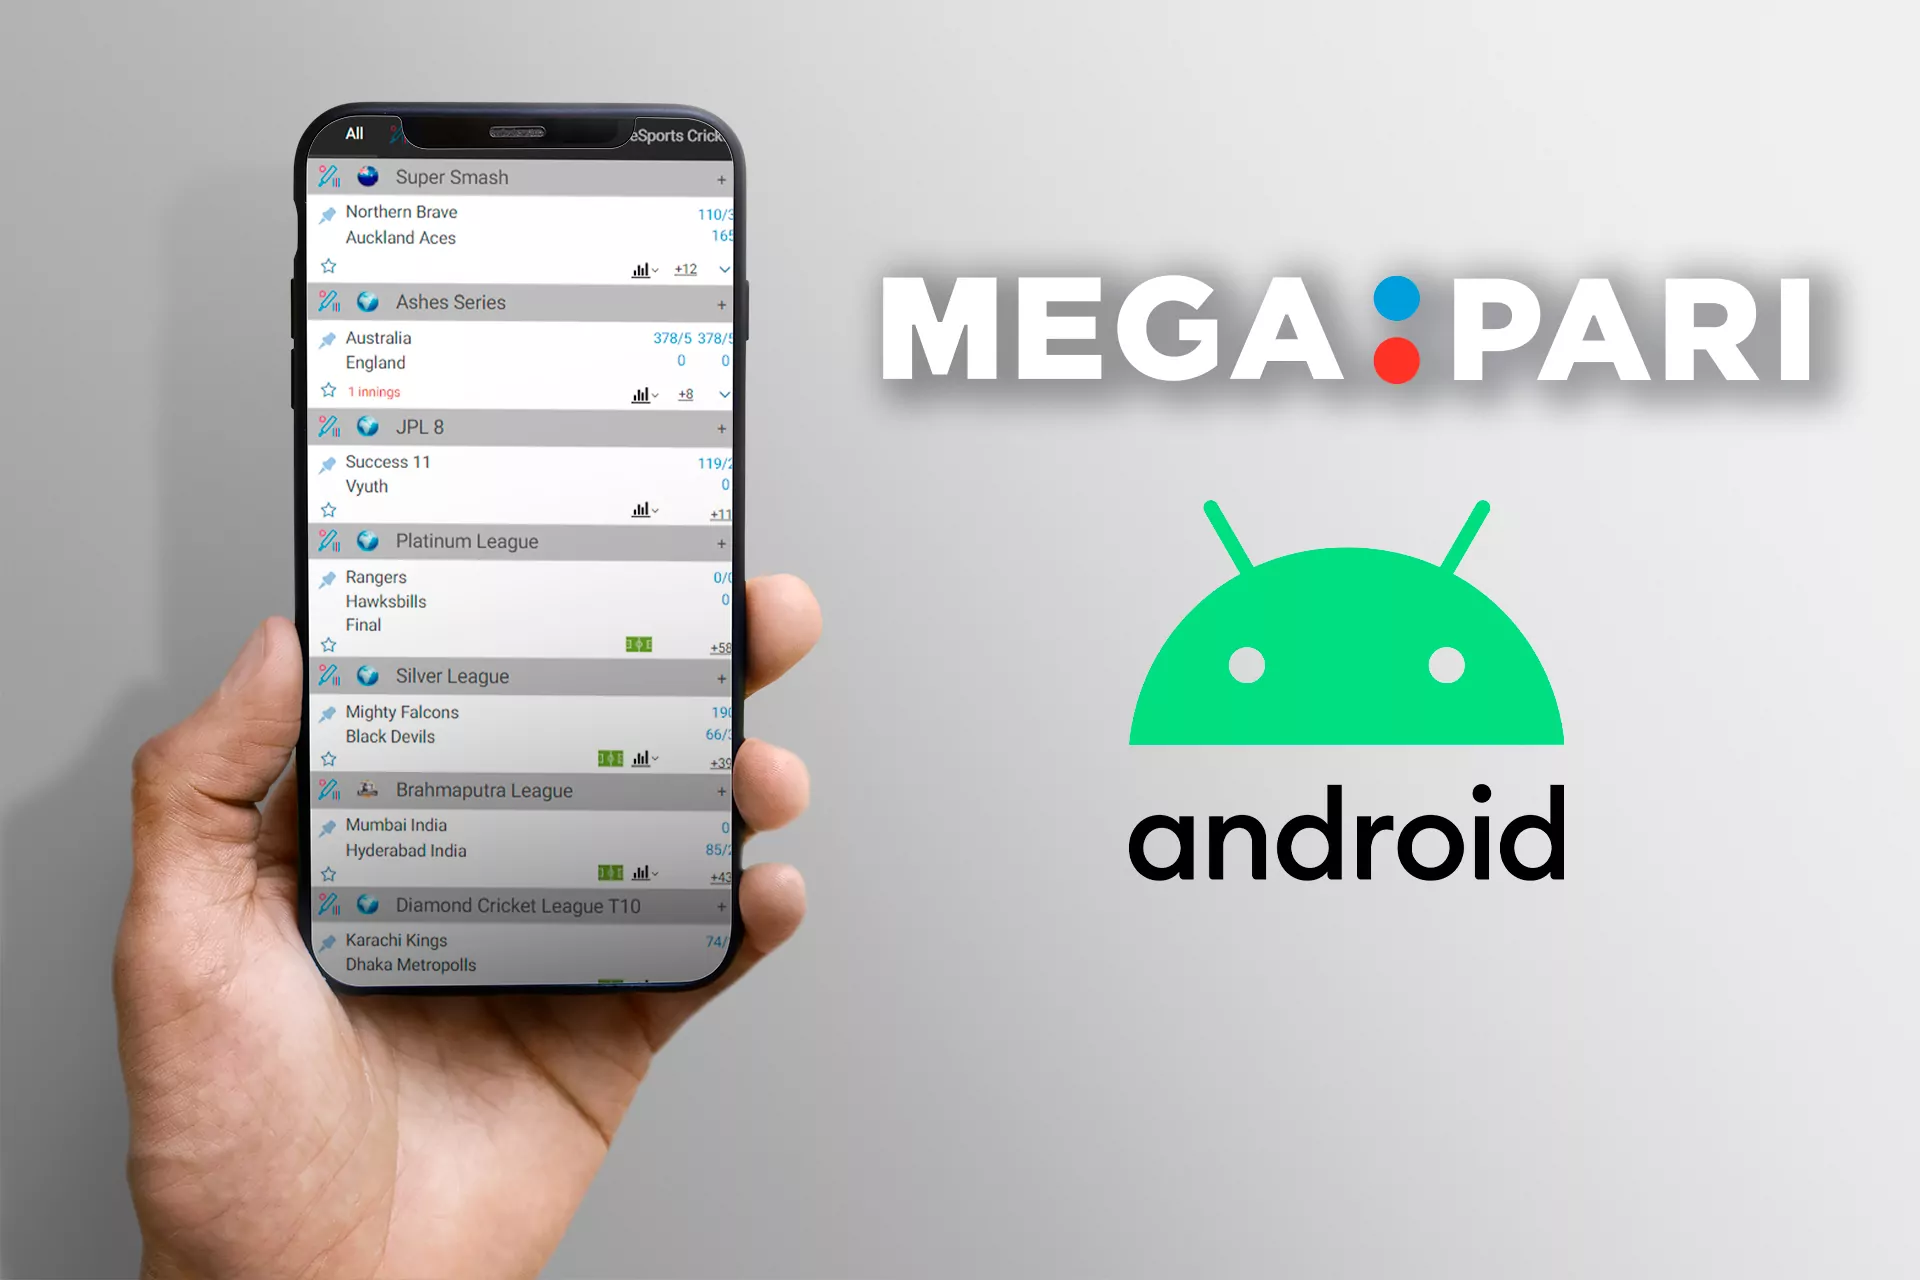 Android devices for the stable operation of the Megapari app.